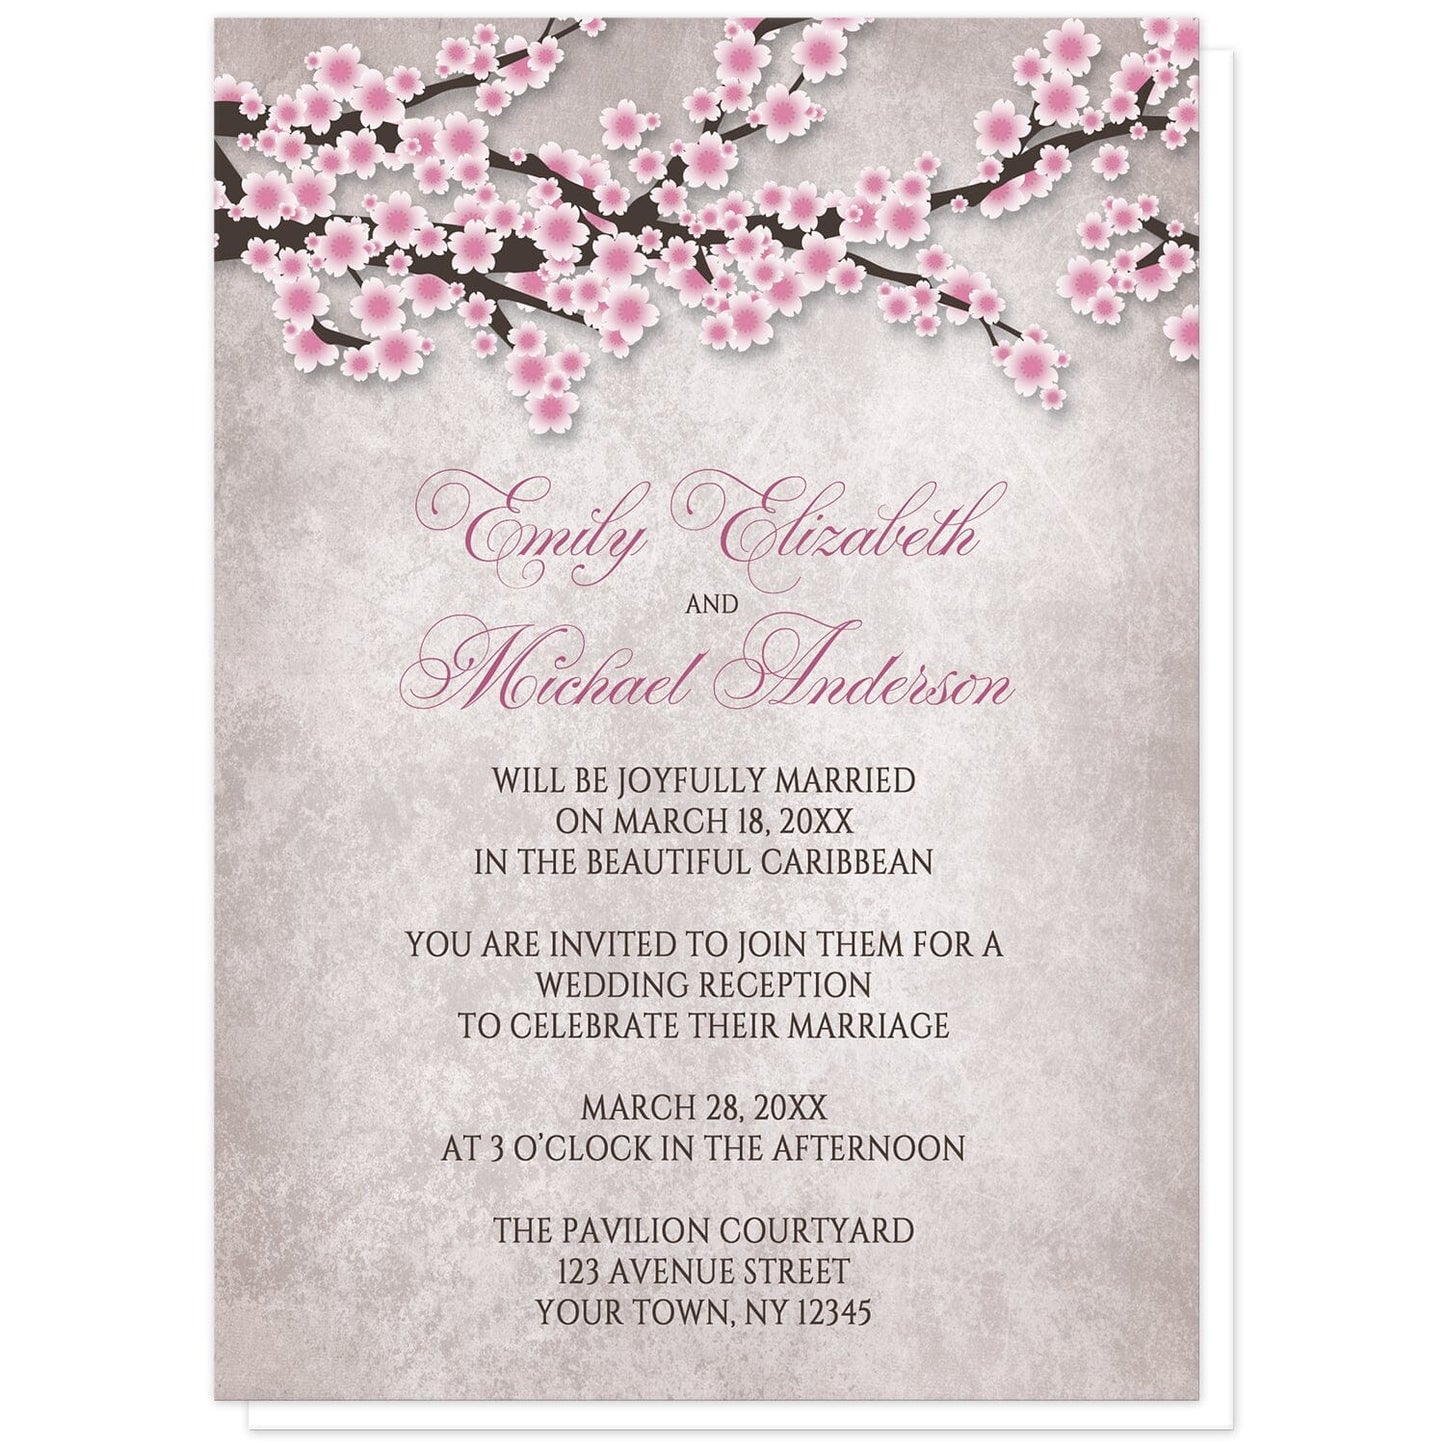 Rustic Pink Cherry Blossom Reception Only Invitations at Artistically Invited. Rustic pink cherry blossom reception only invitations featuring an illustration of pink and white with dark brown cherry blossom branches along the top. Your personalized post-wedding reception details are custom printed in pink and dark brown over a stony grayish brown background below the pretty cherry blossom branches. 